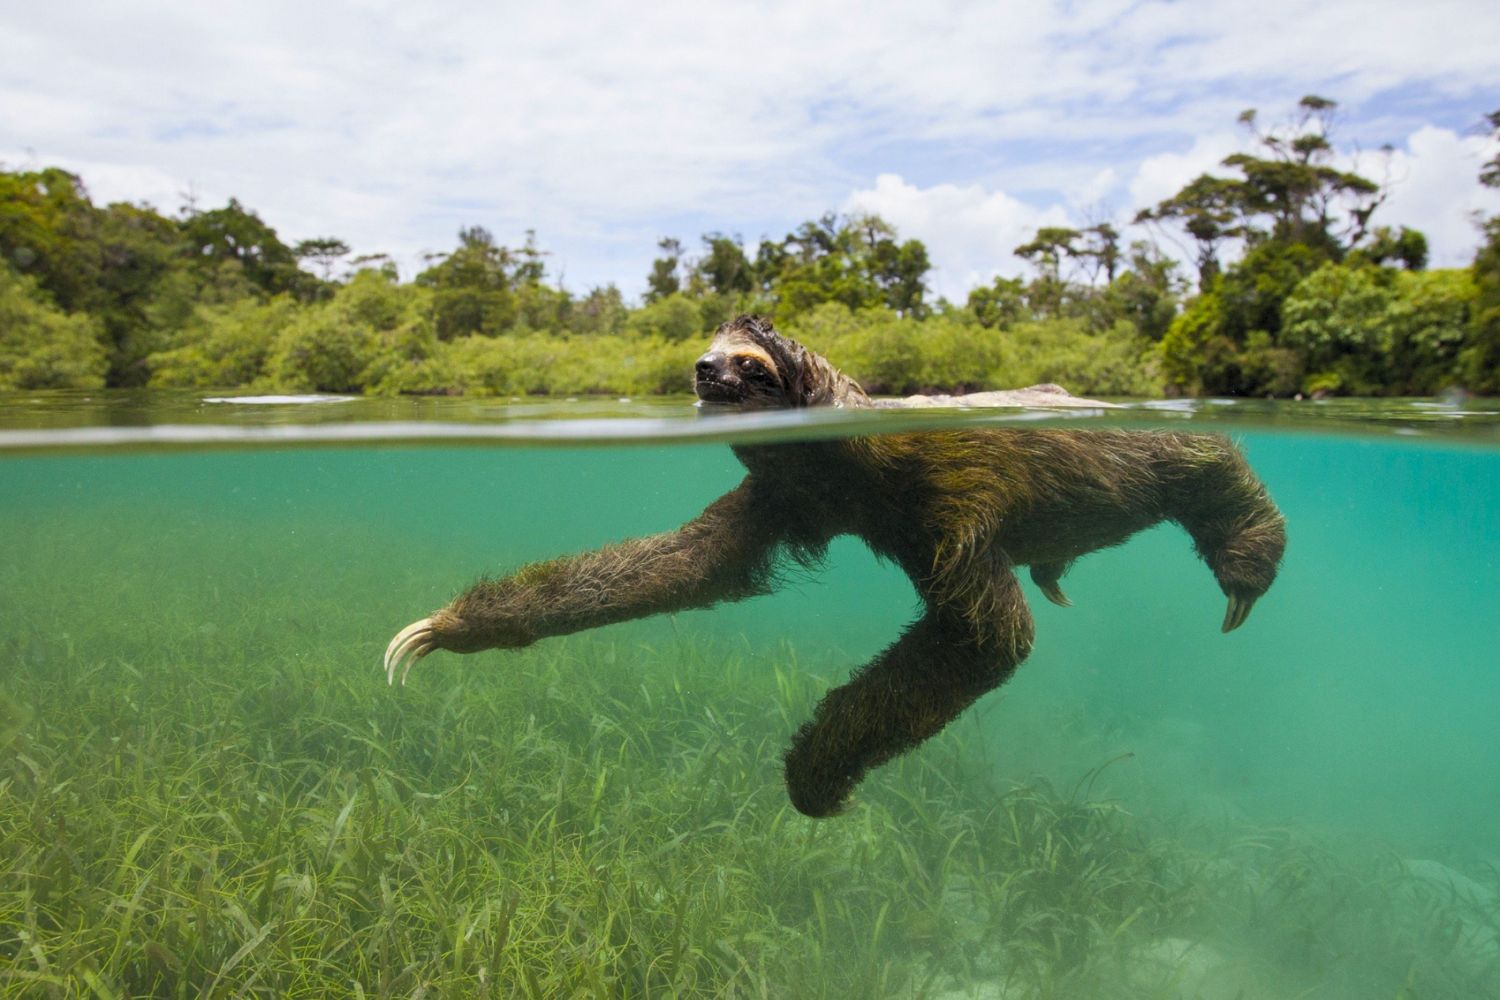 9. Sloths are amazing swimmers.